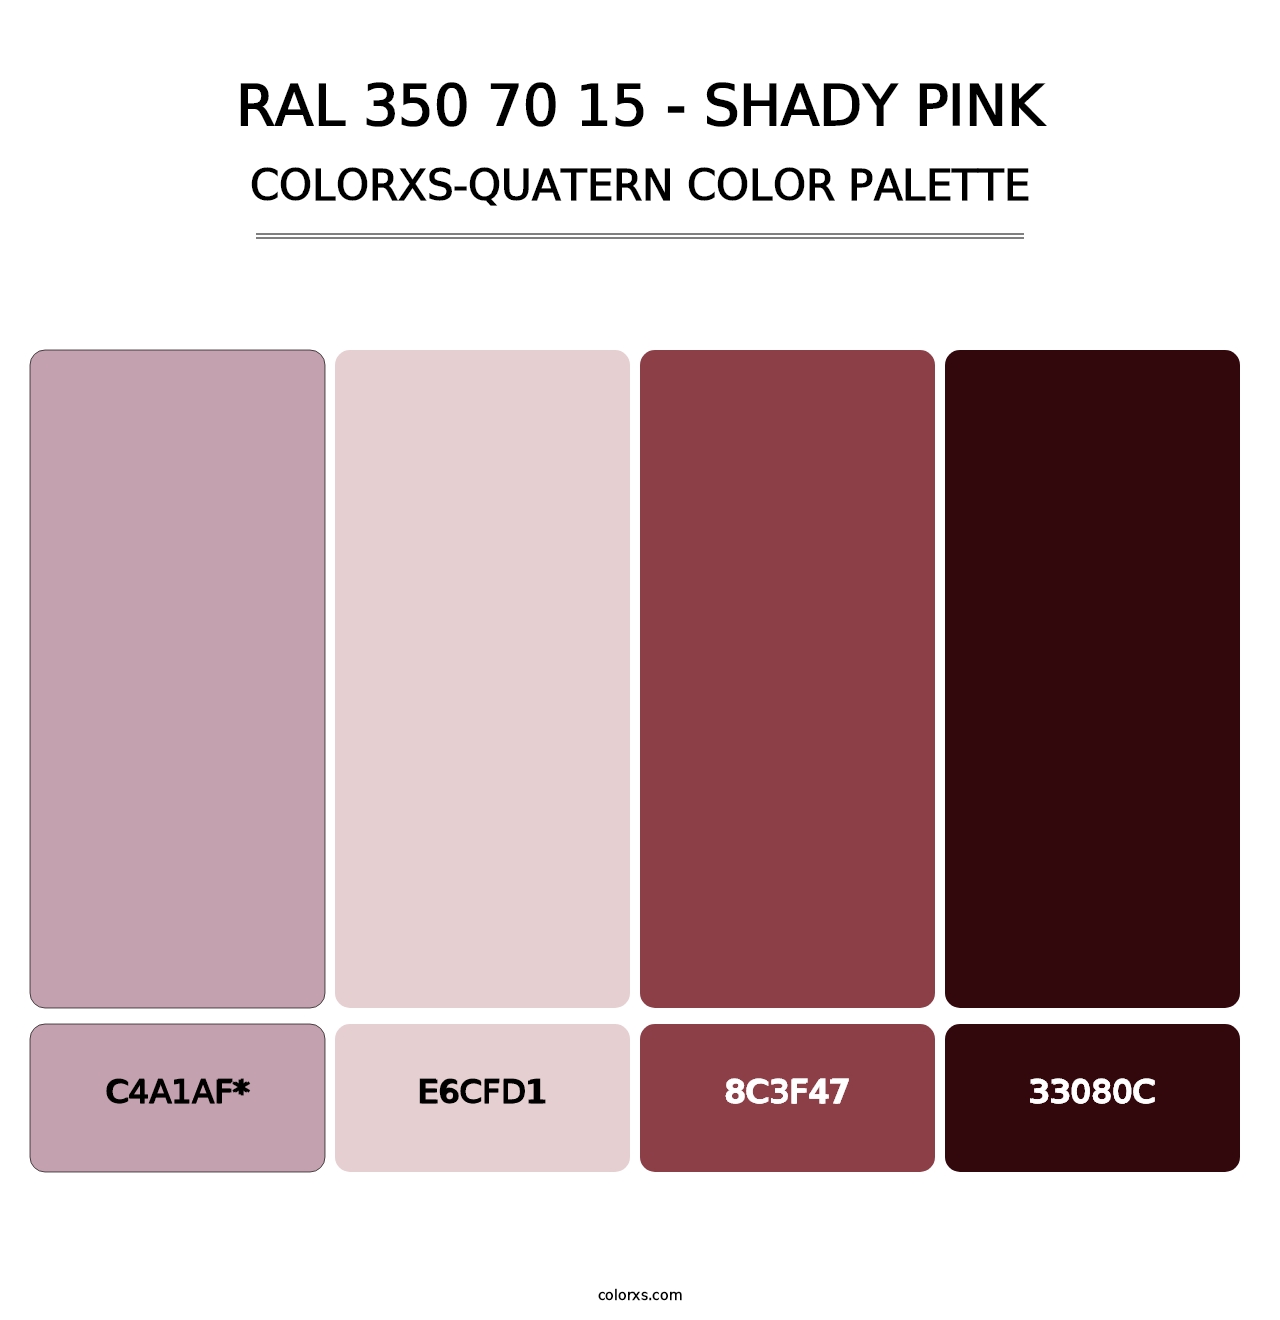 RAL 350 70 15 - Shady Pink - Colorxs Quatern Palette